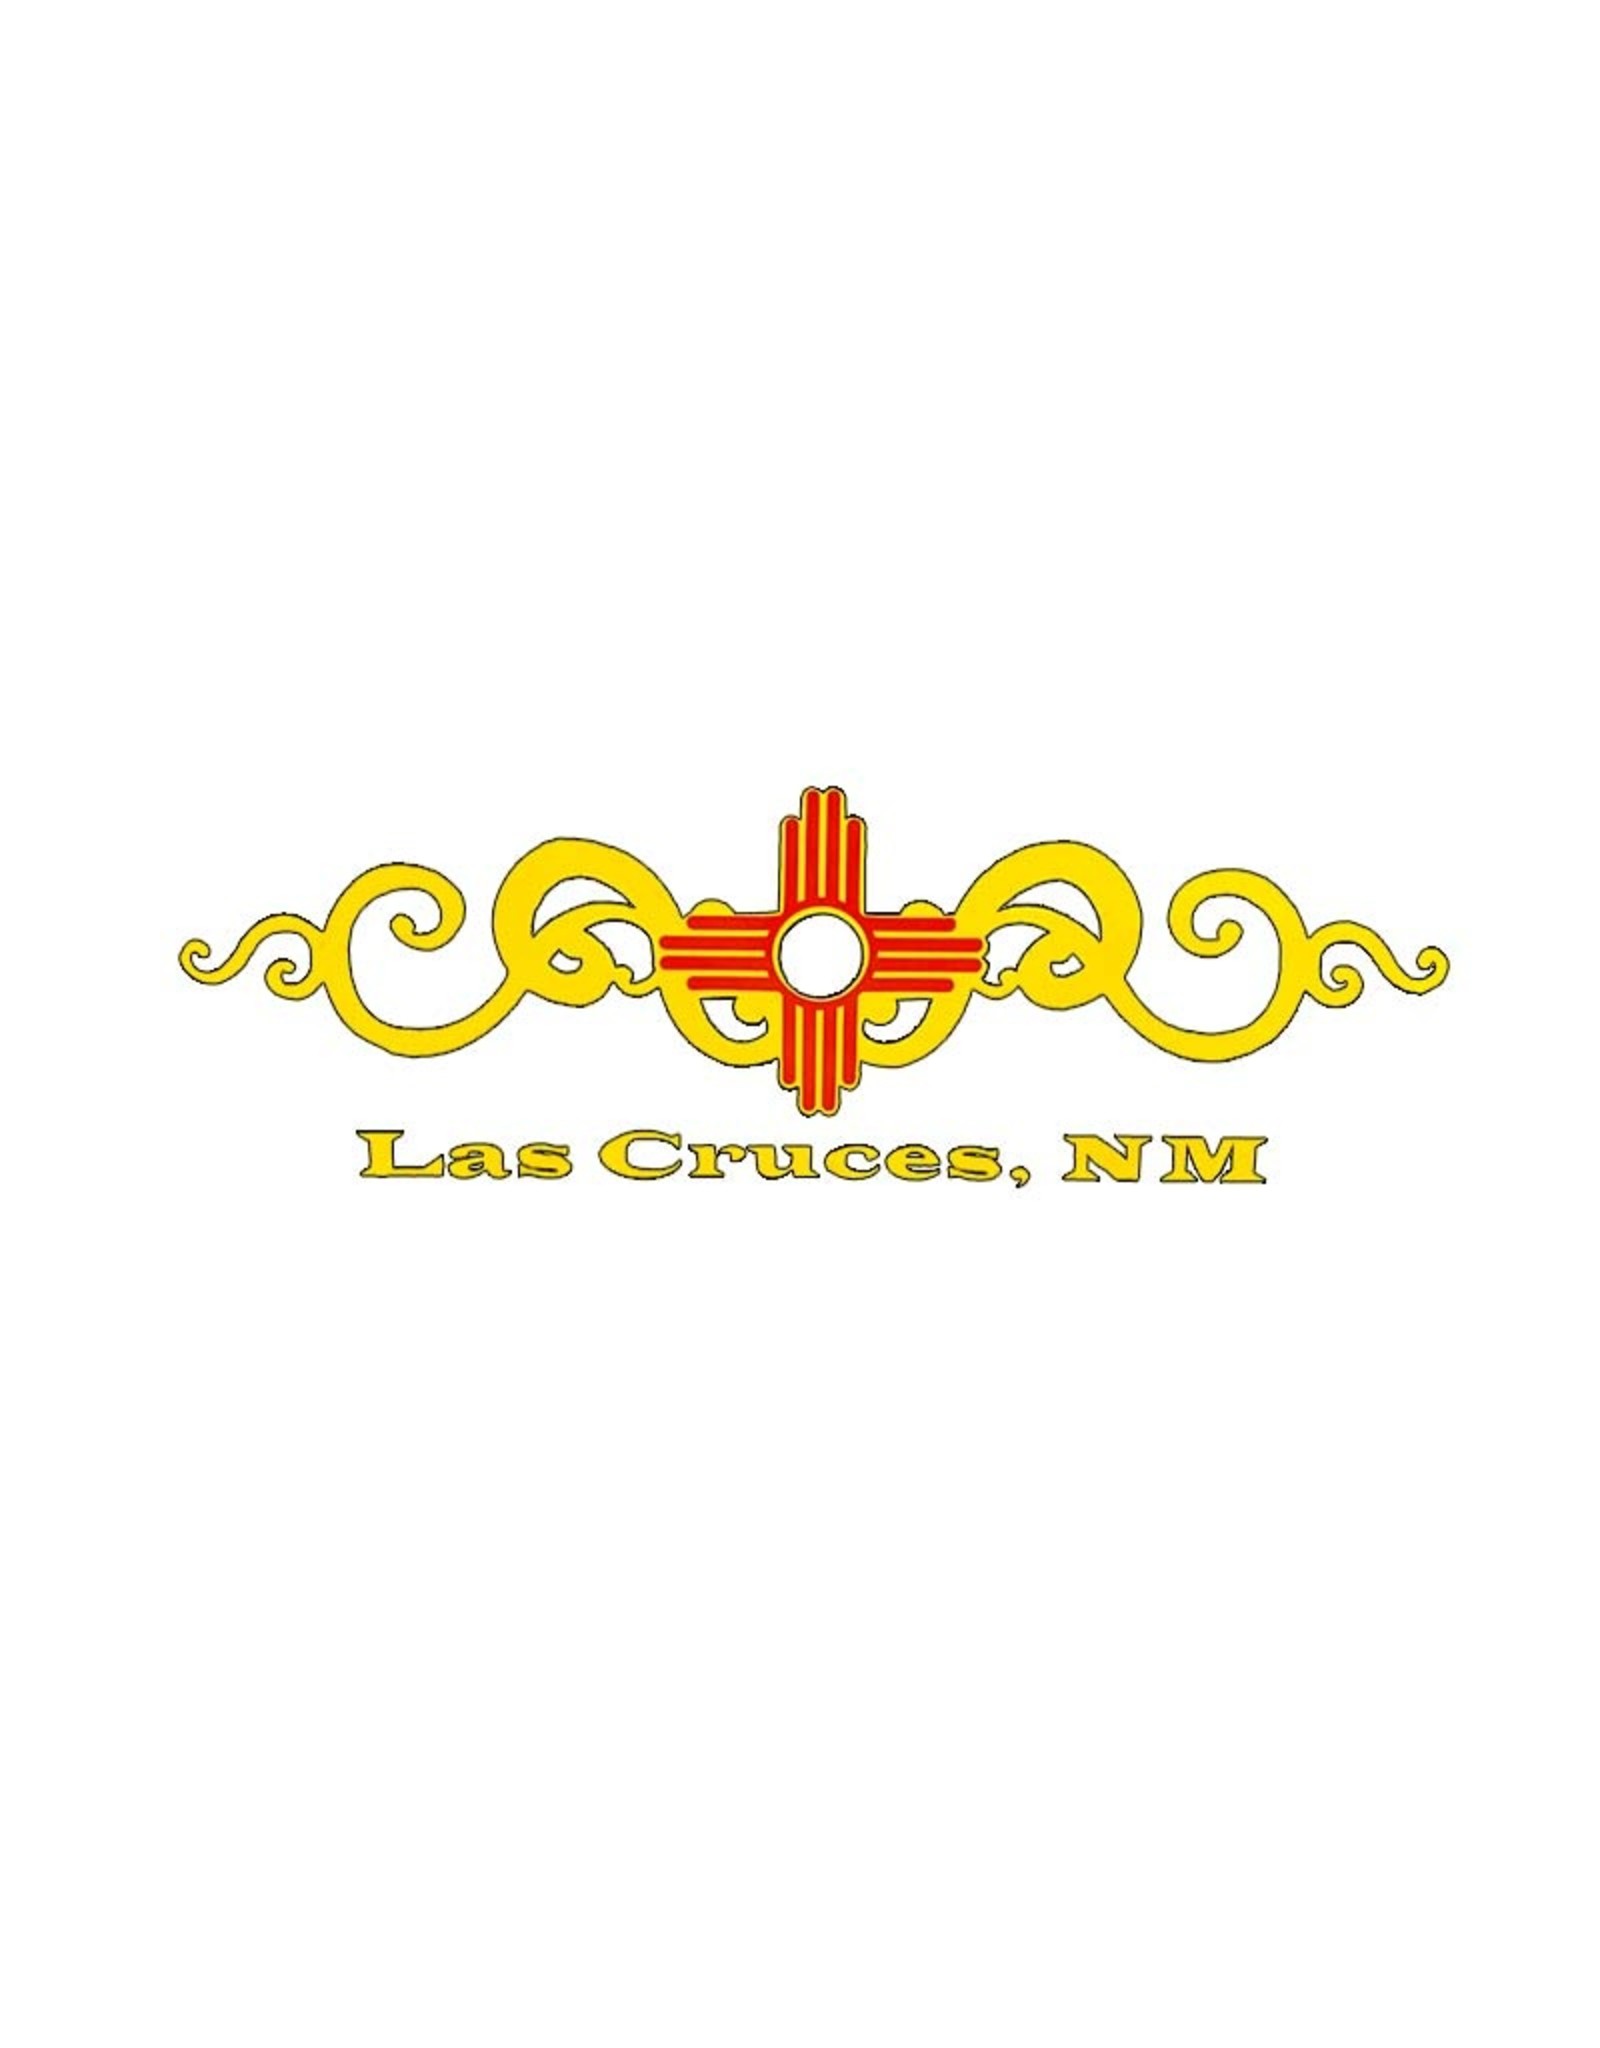 Brass Reminders Co. Inc. Las Cruces with Swirls